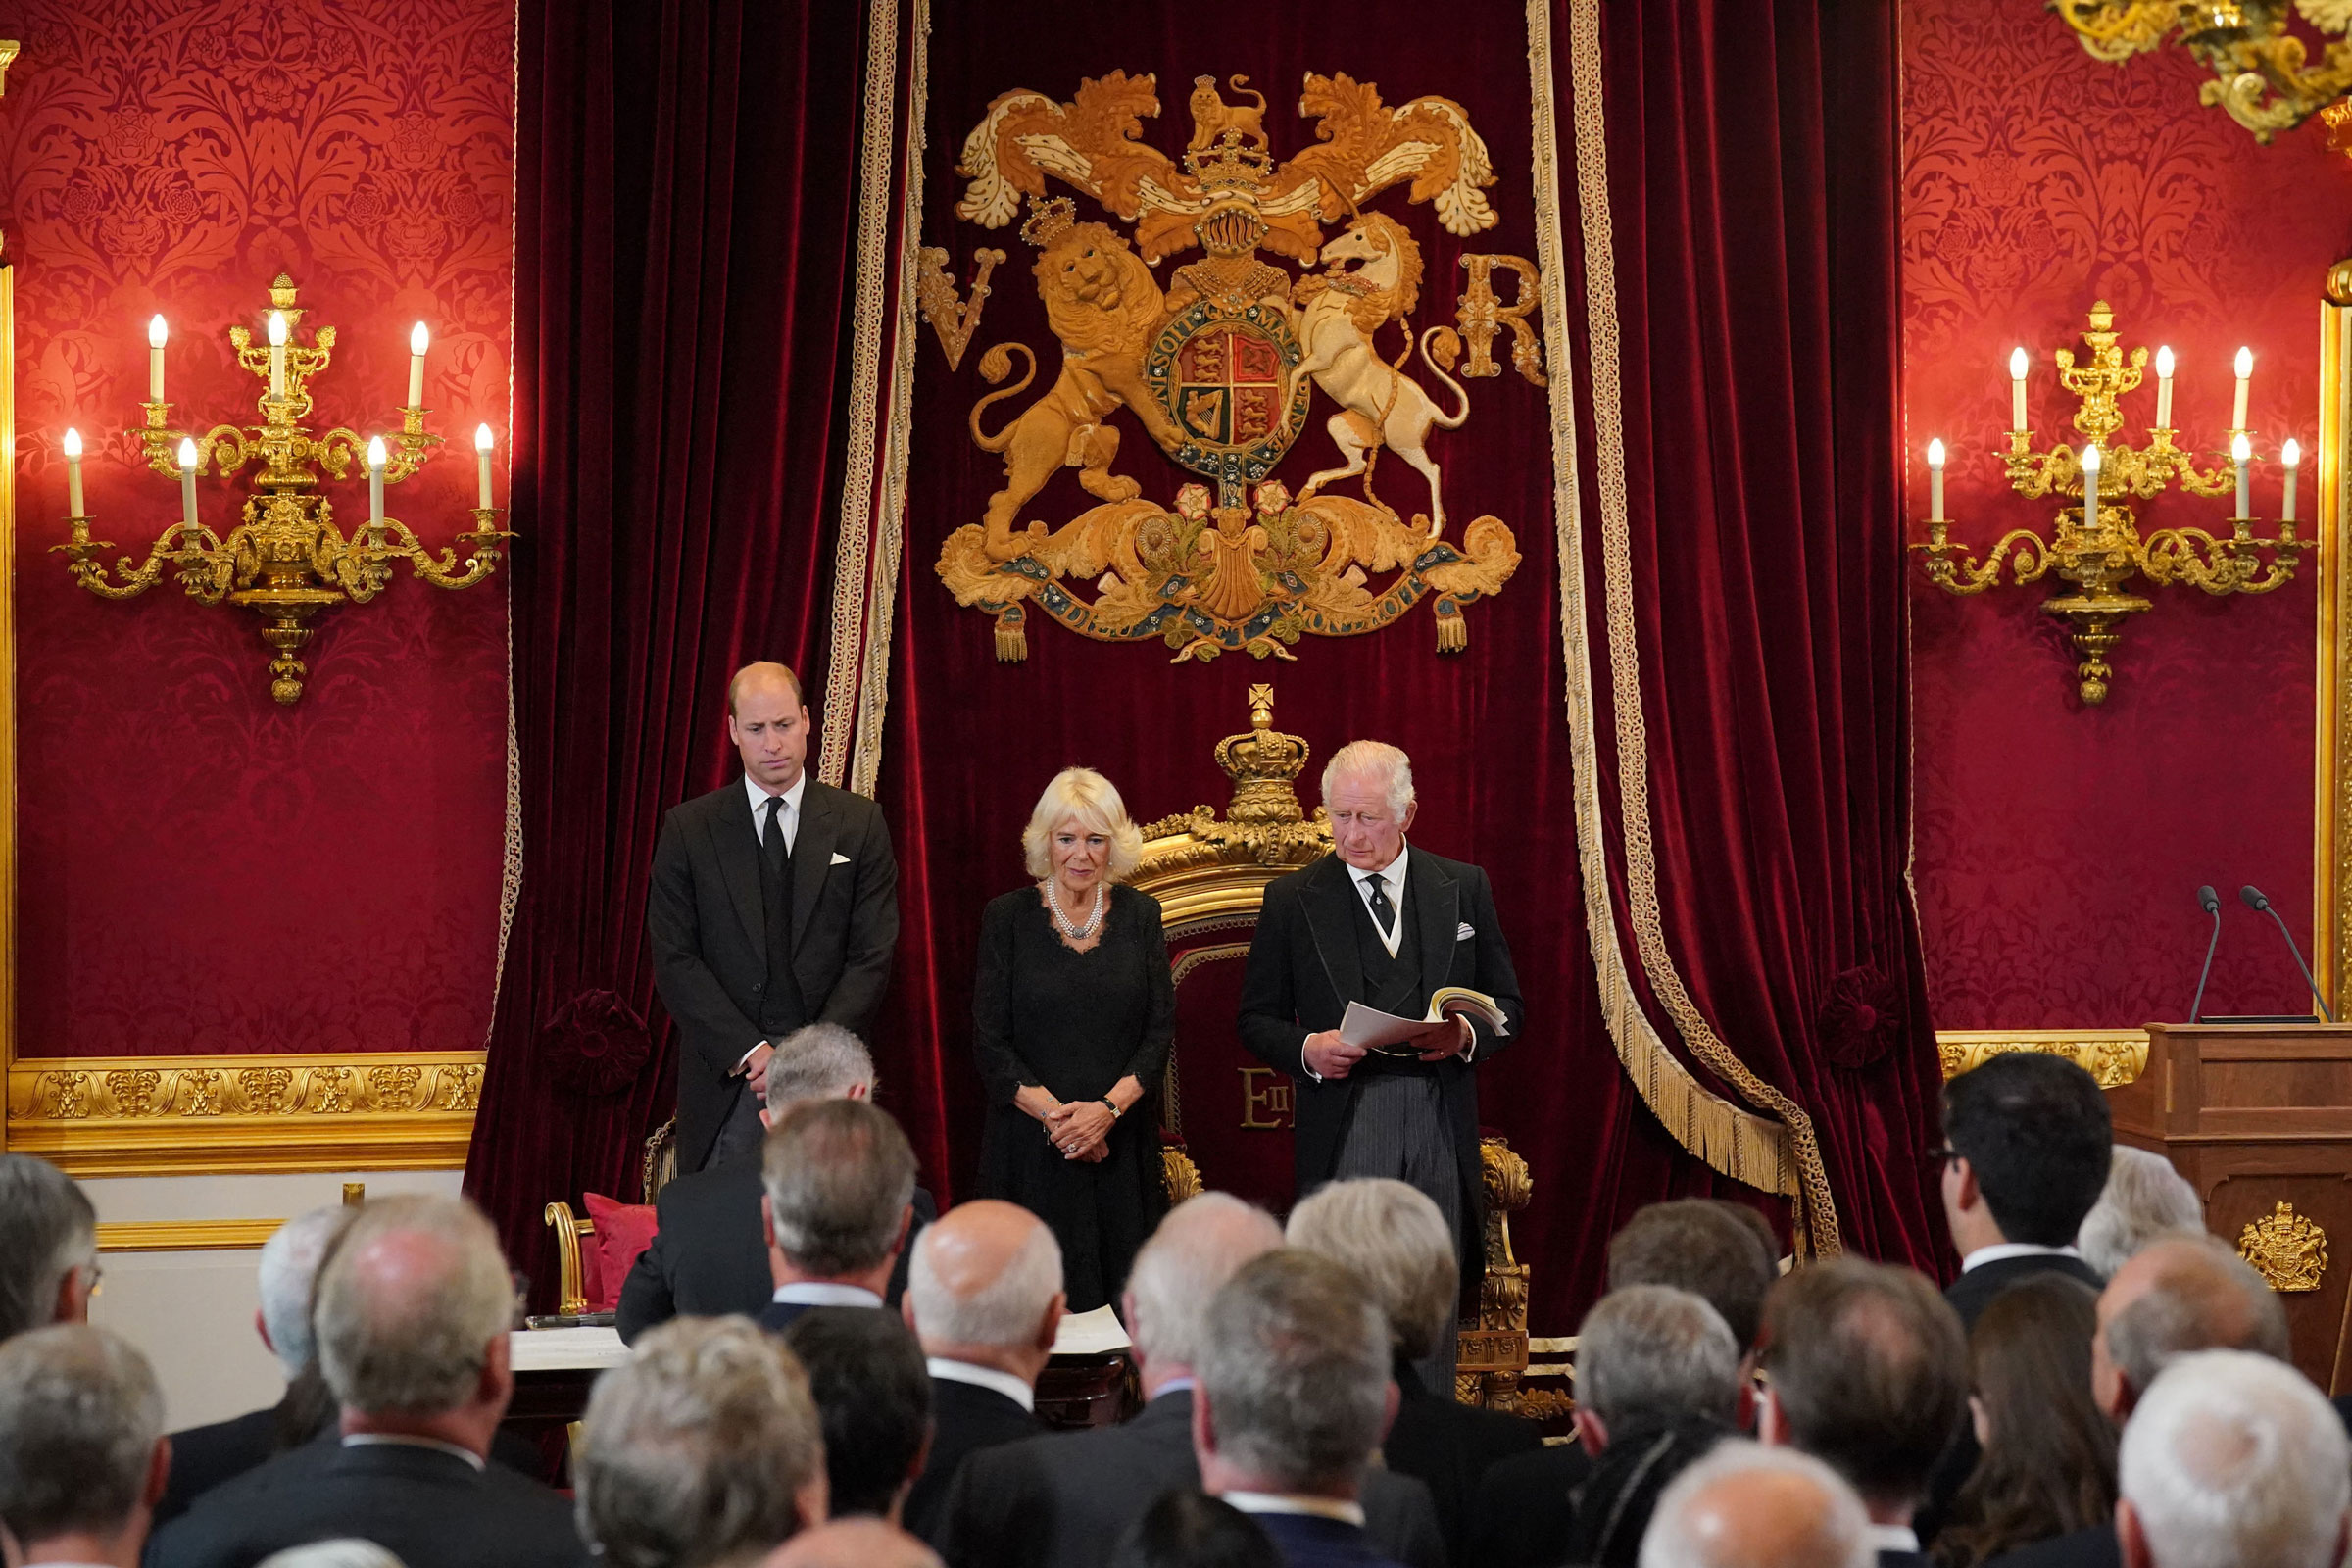 The UK's King Charles III speaks in the Throne Room at St. James's Palace during the Accession Council in London on Saturday. Joining him were his son Prince William and his wife Camilla, the Queen Consort.